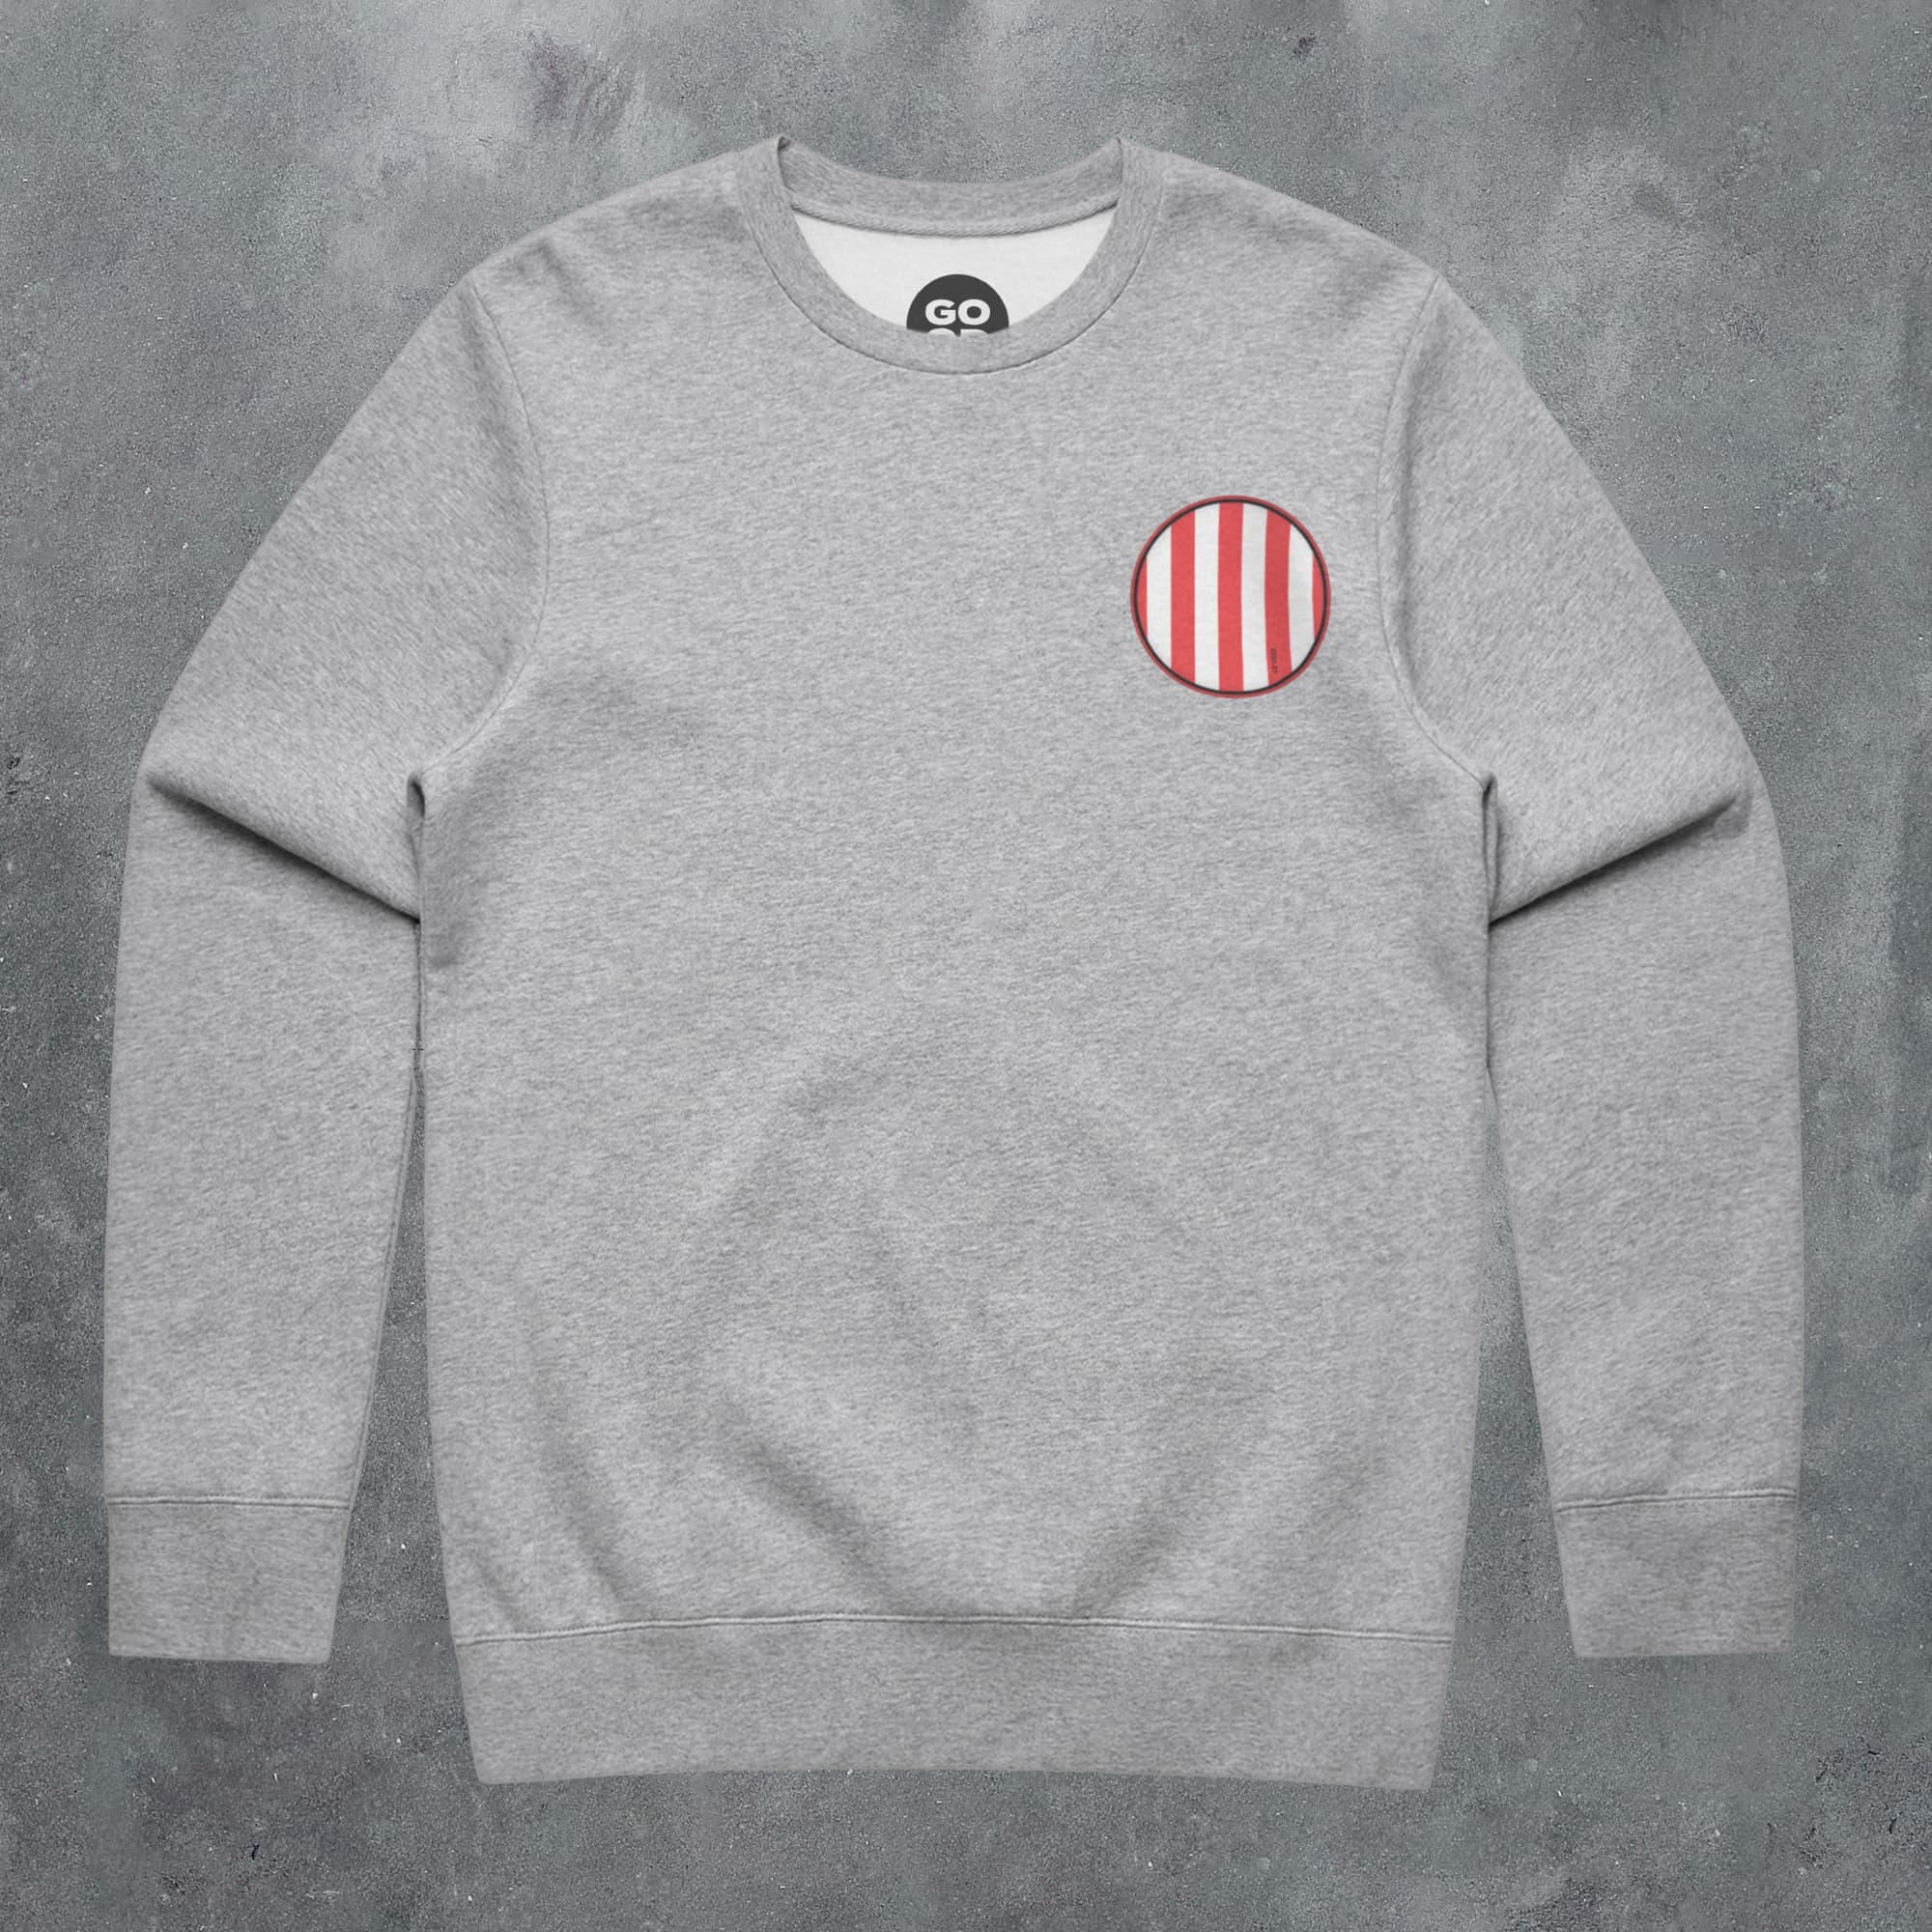 a grey sweatshirt with a red and white striped circle on it